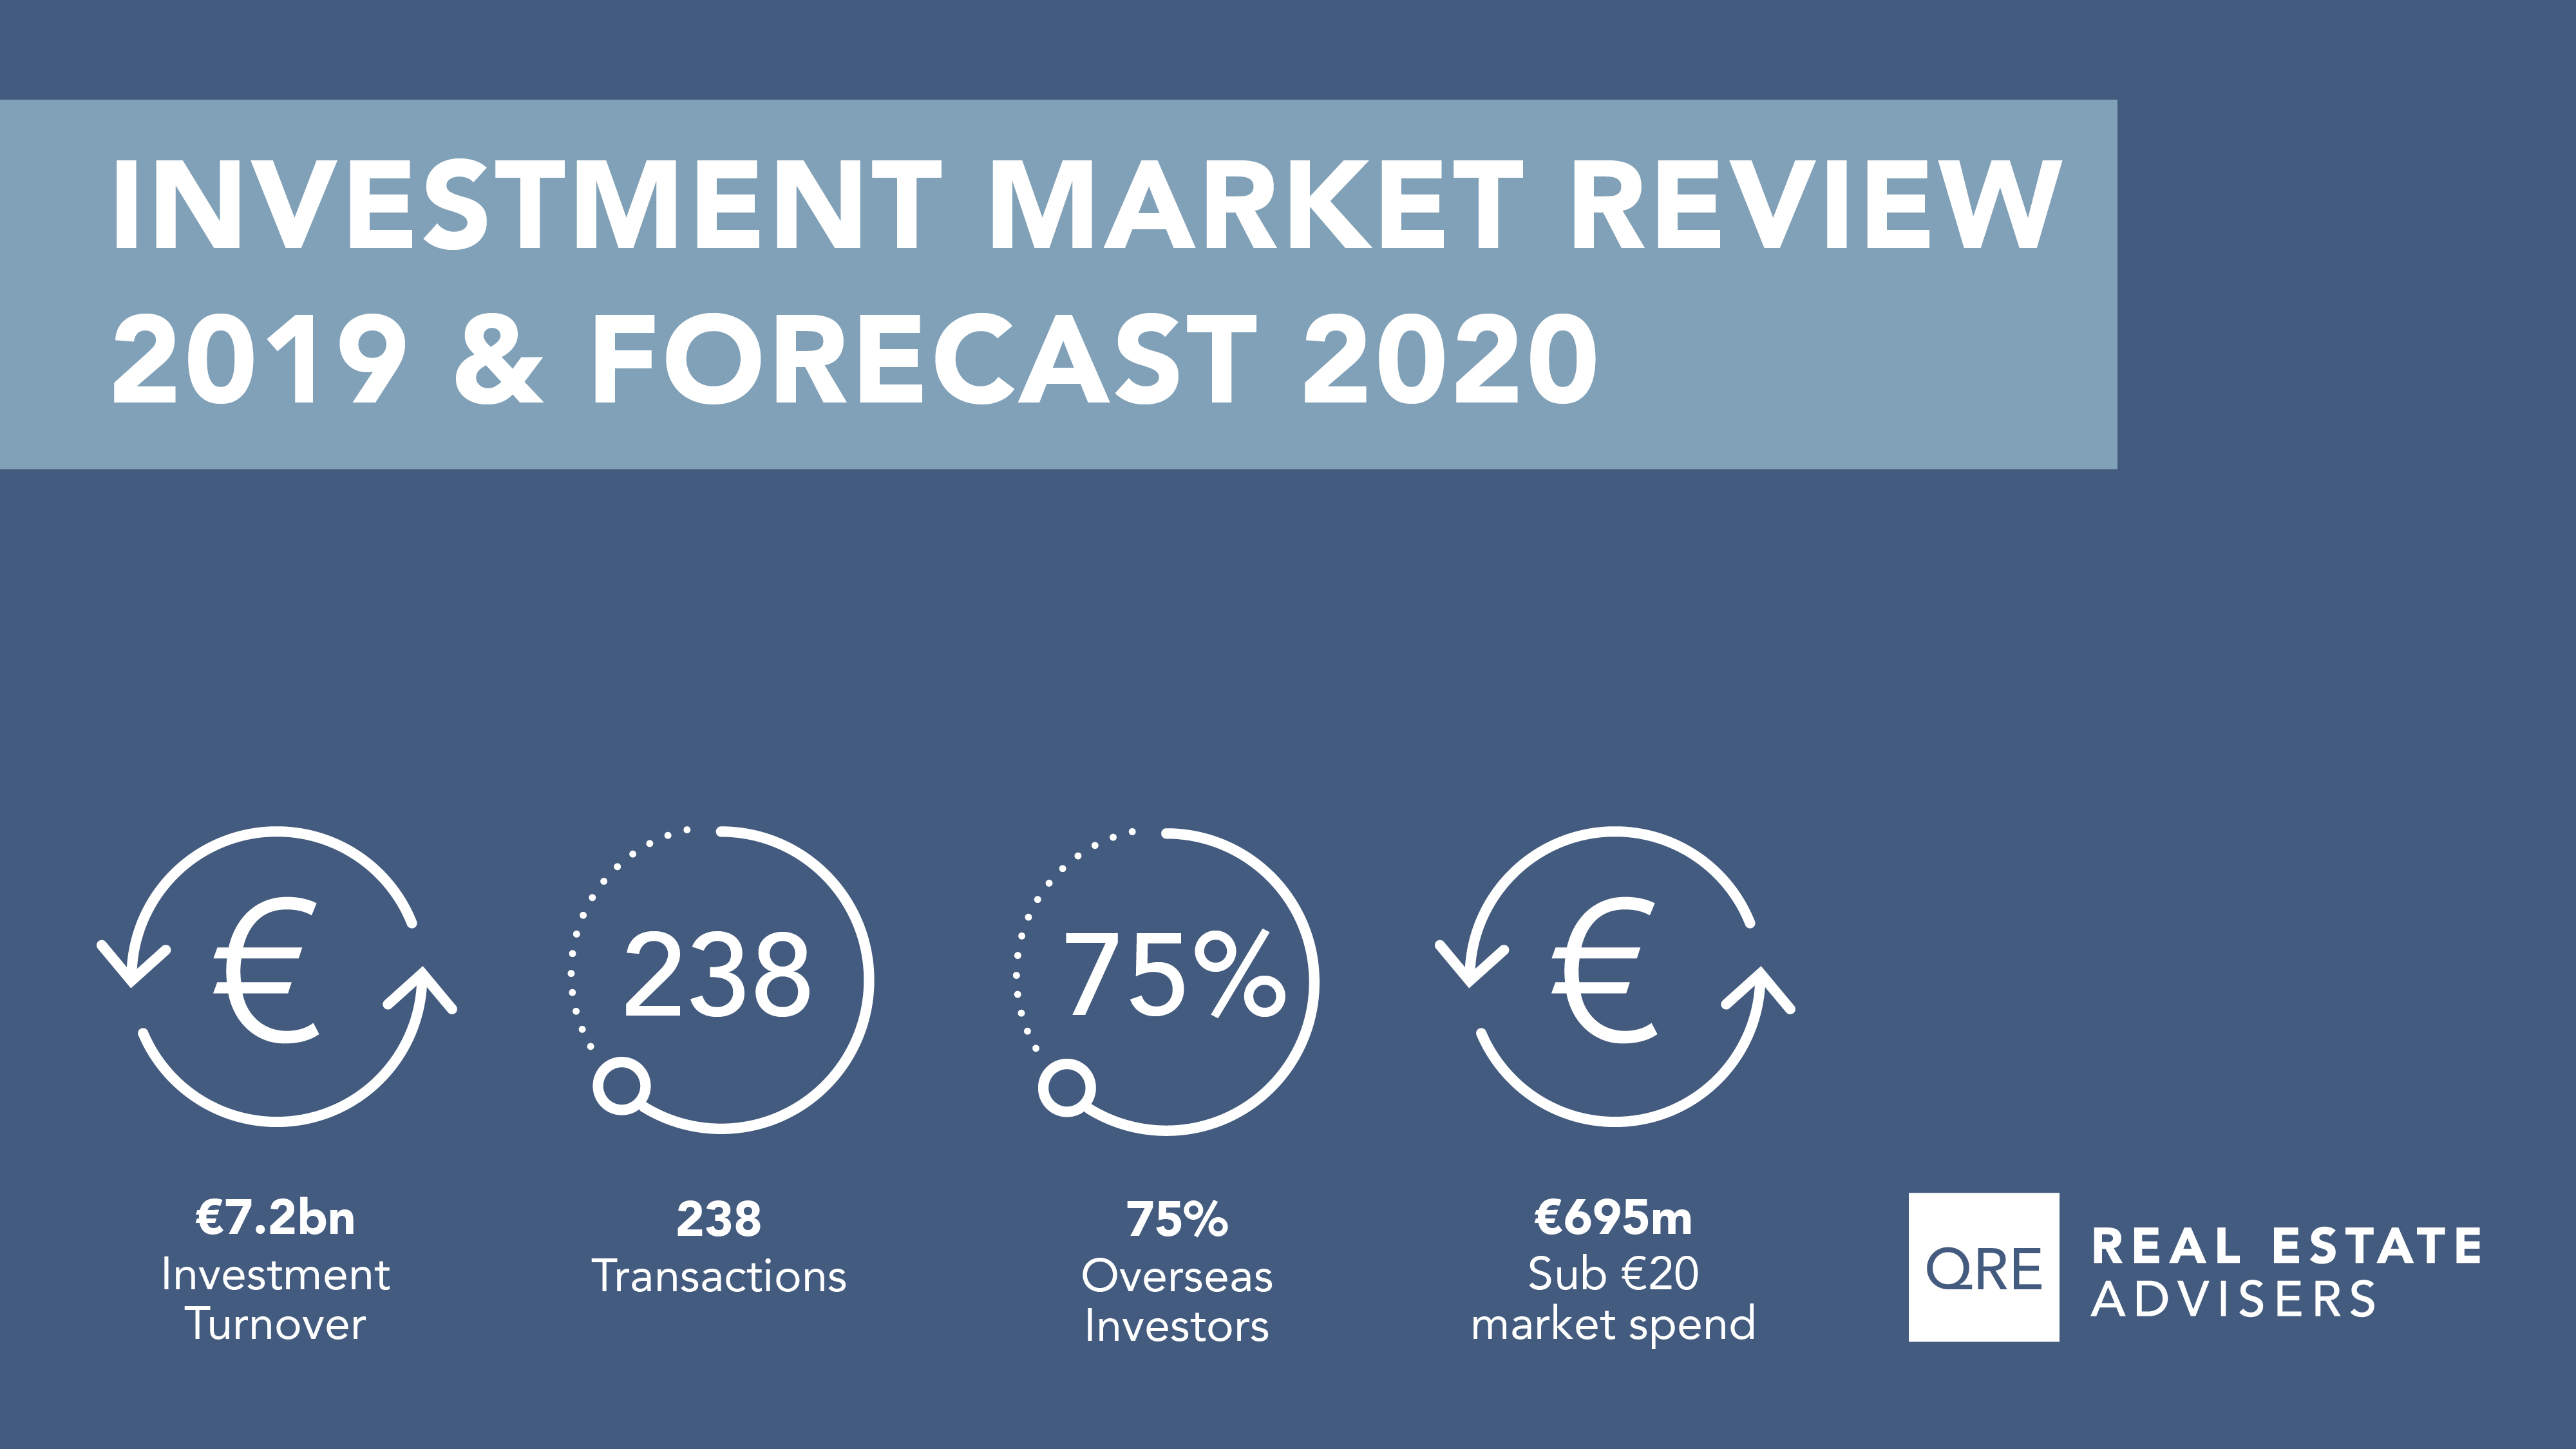 QRE 2019 Investment Market Review 